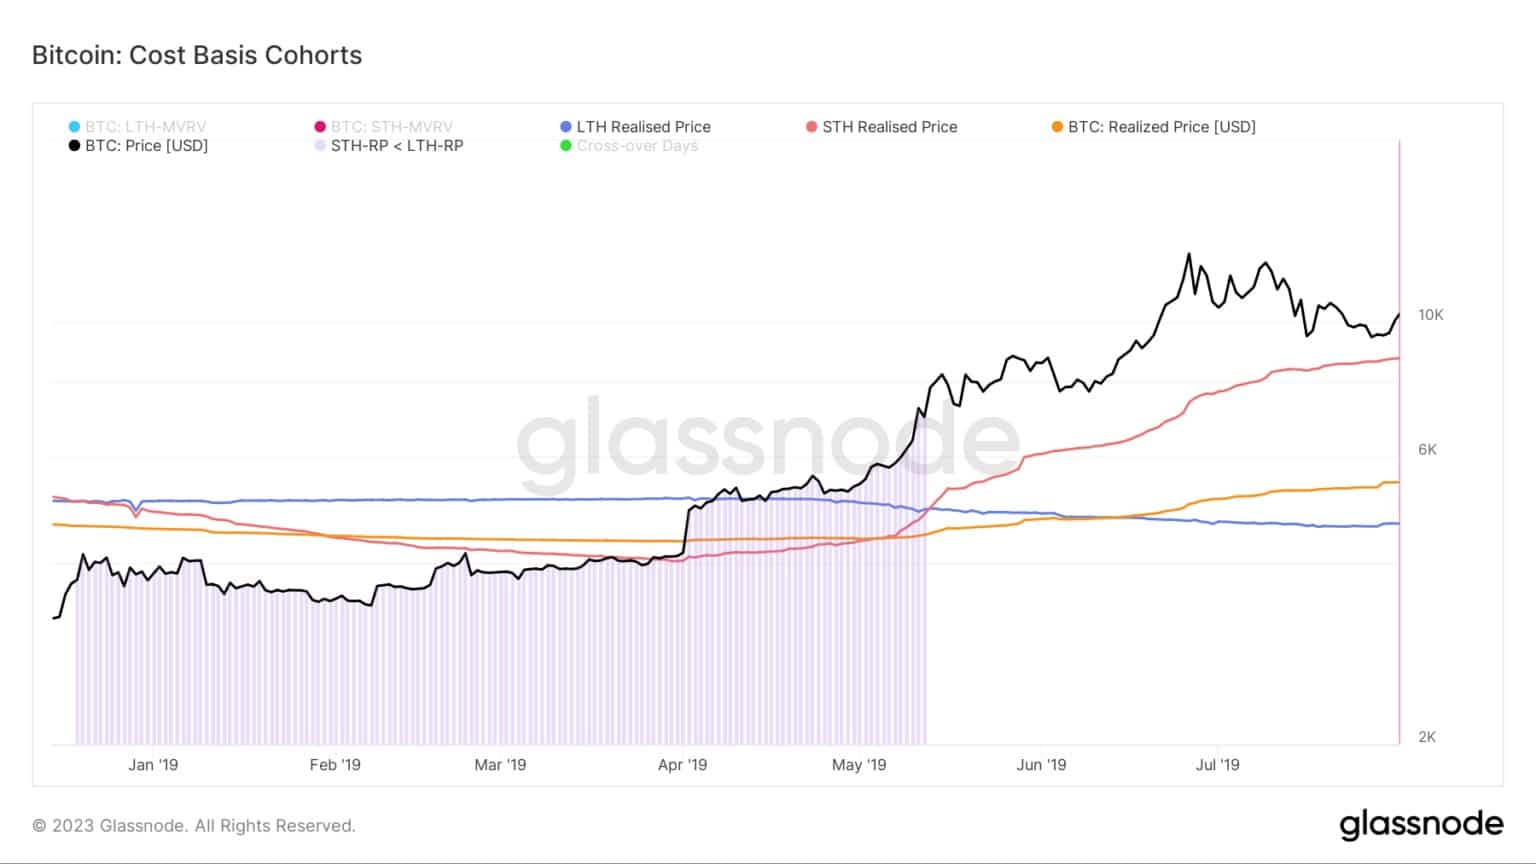 Graph showing the cost-basis for Bitcoin cohorts during the 2018/2019 bear market (Source: Glassnode)